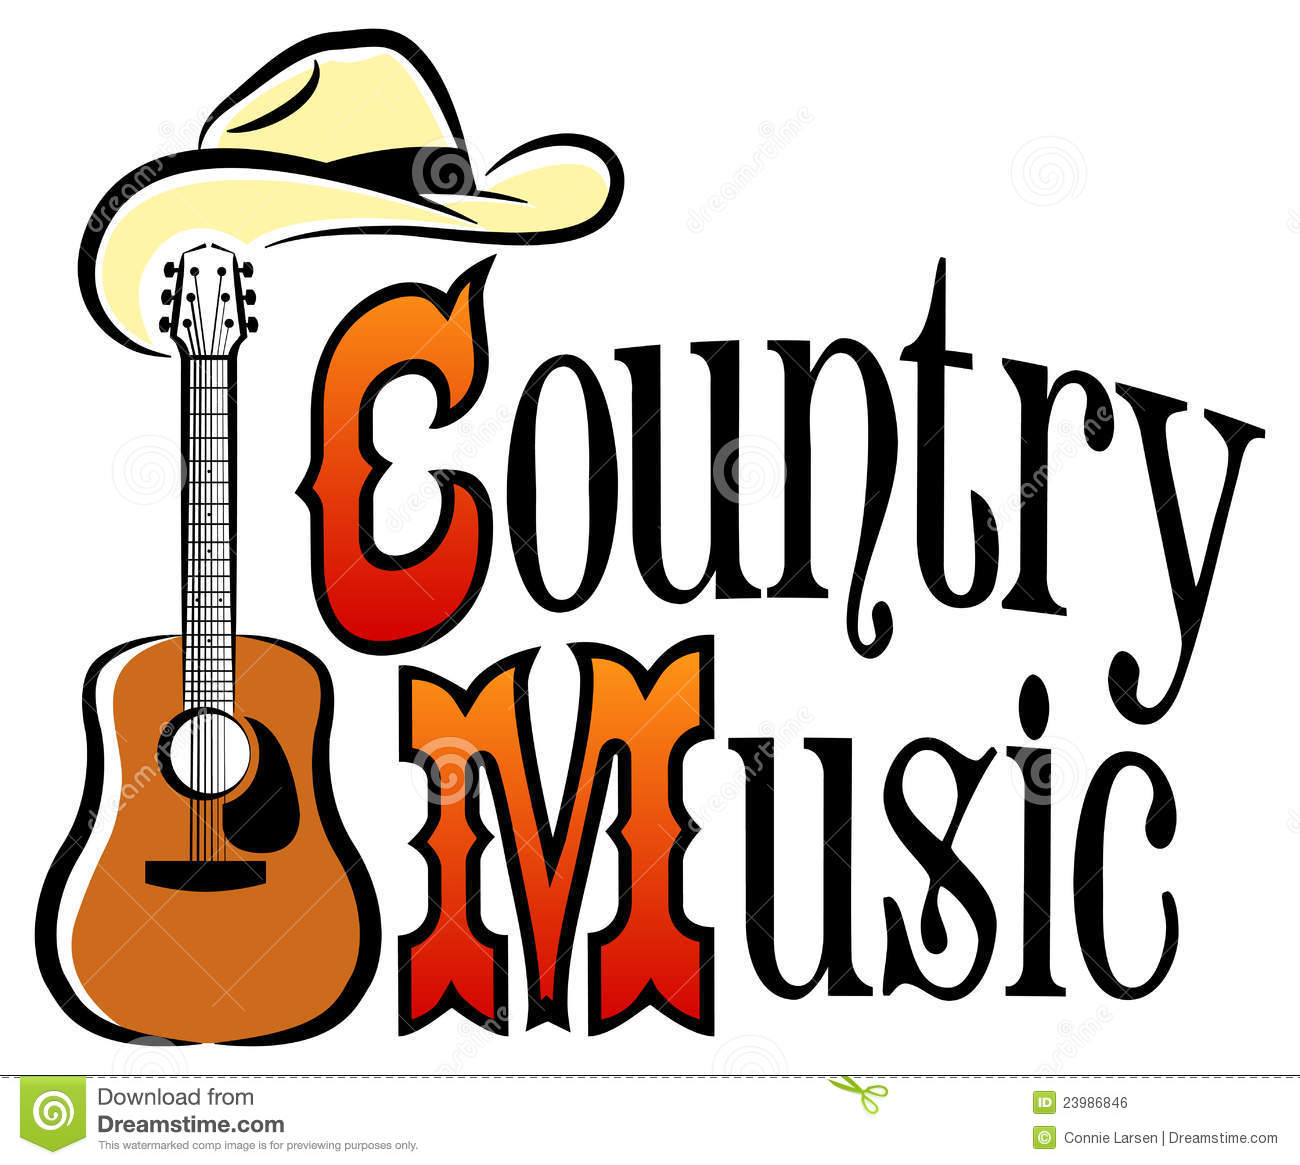 Logo Type Illustration Of The Title Country Music With An Acoustic